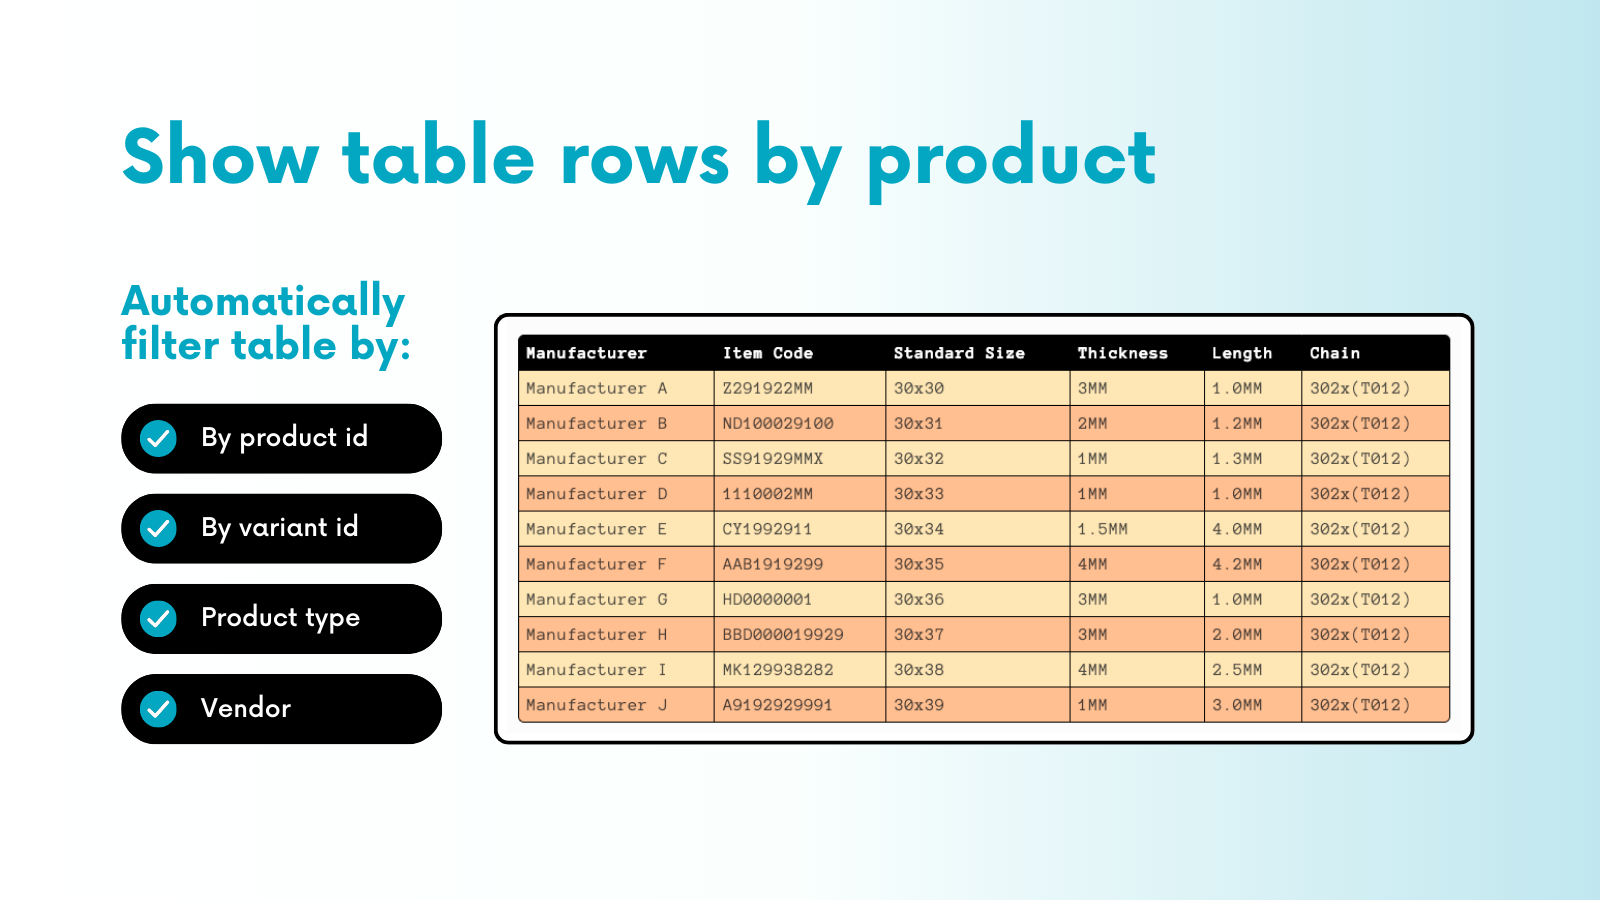 Auto filter table based on product attributes